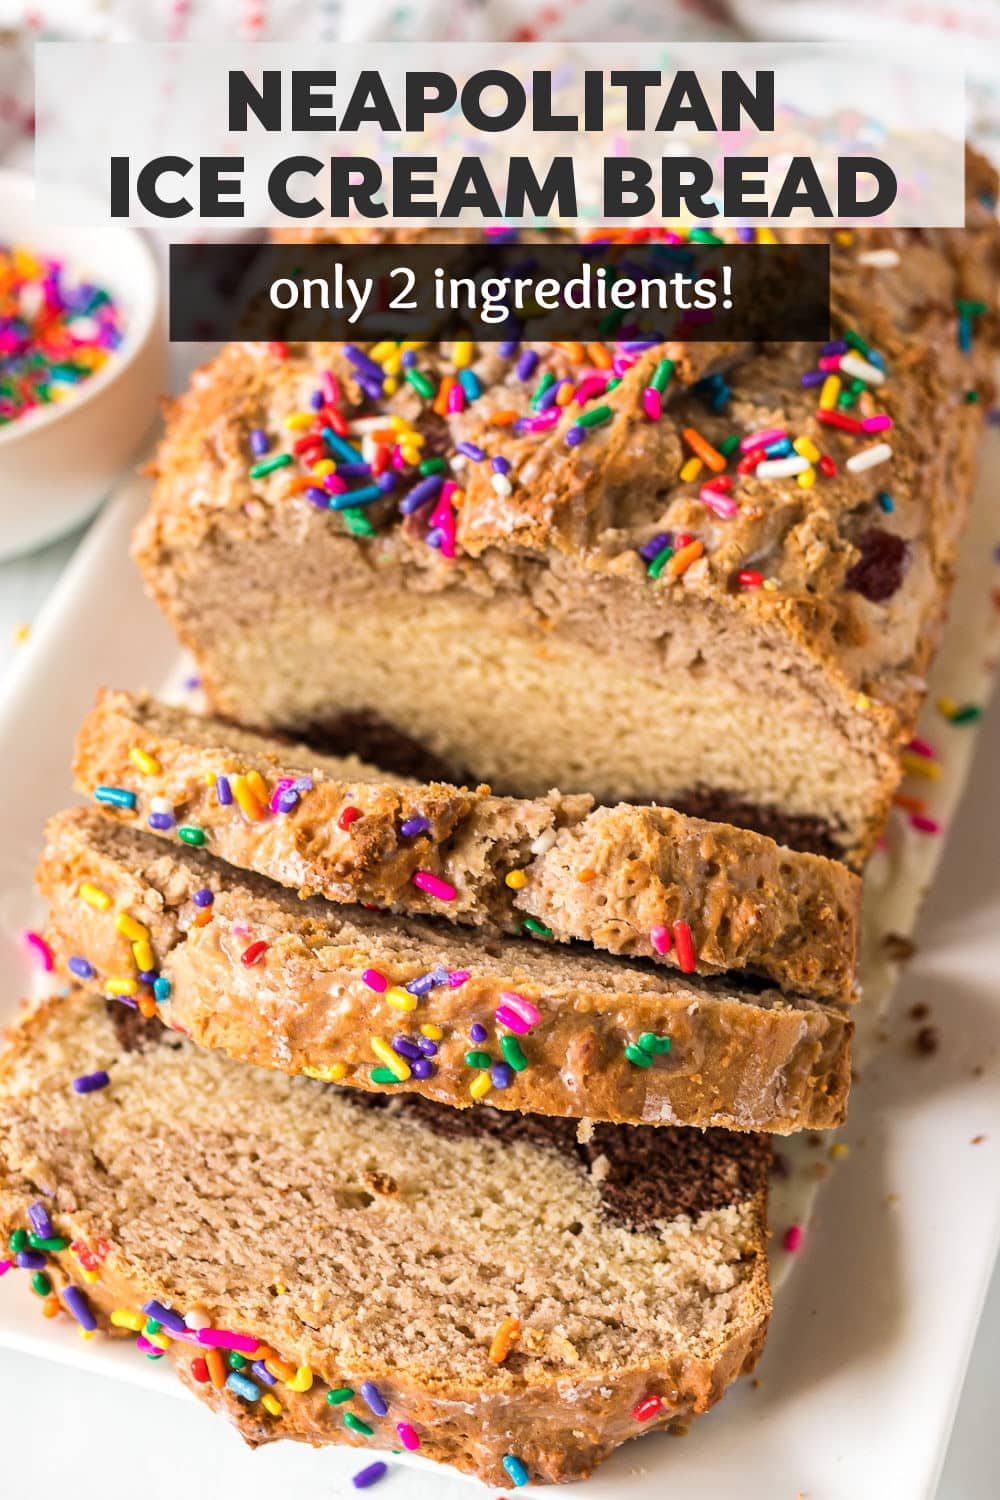 Neapolitan ice cream bread is a delicious and easy TWO ingredient recipe. Classic vanilla, strawberry, and chocolate neapolitan ice cream is mixed with self rising flour to make a tasty dessert loaf. Topped with a simple glaze and sprinkles, this easy dessert is a hit with all ages! | www.persnicketyplates.com